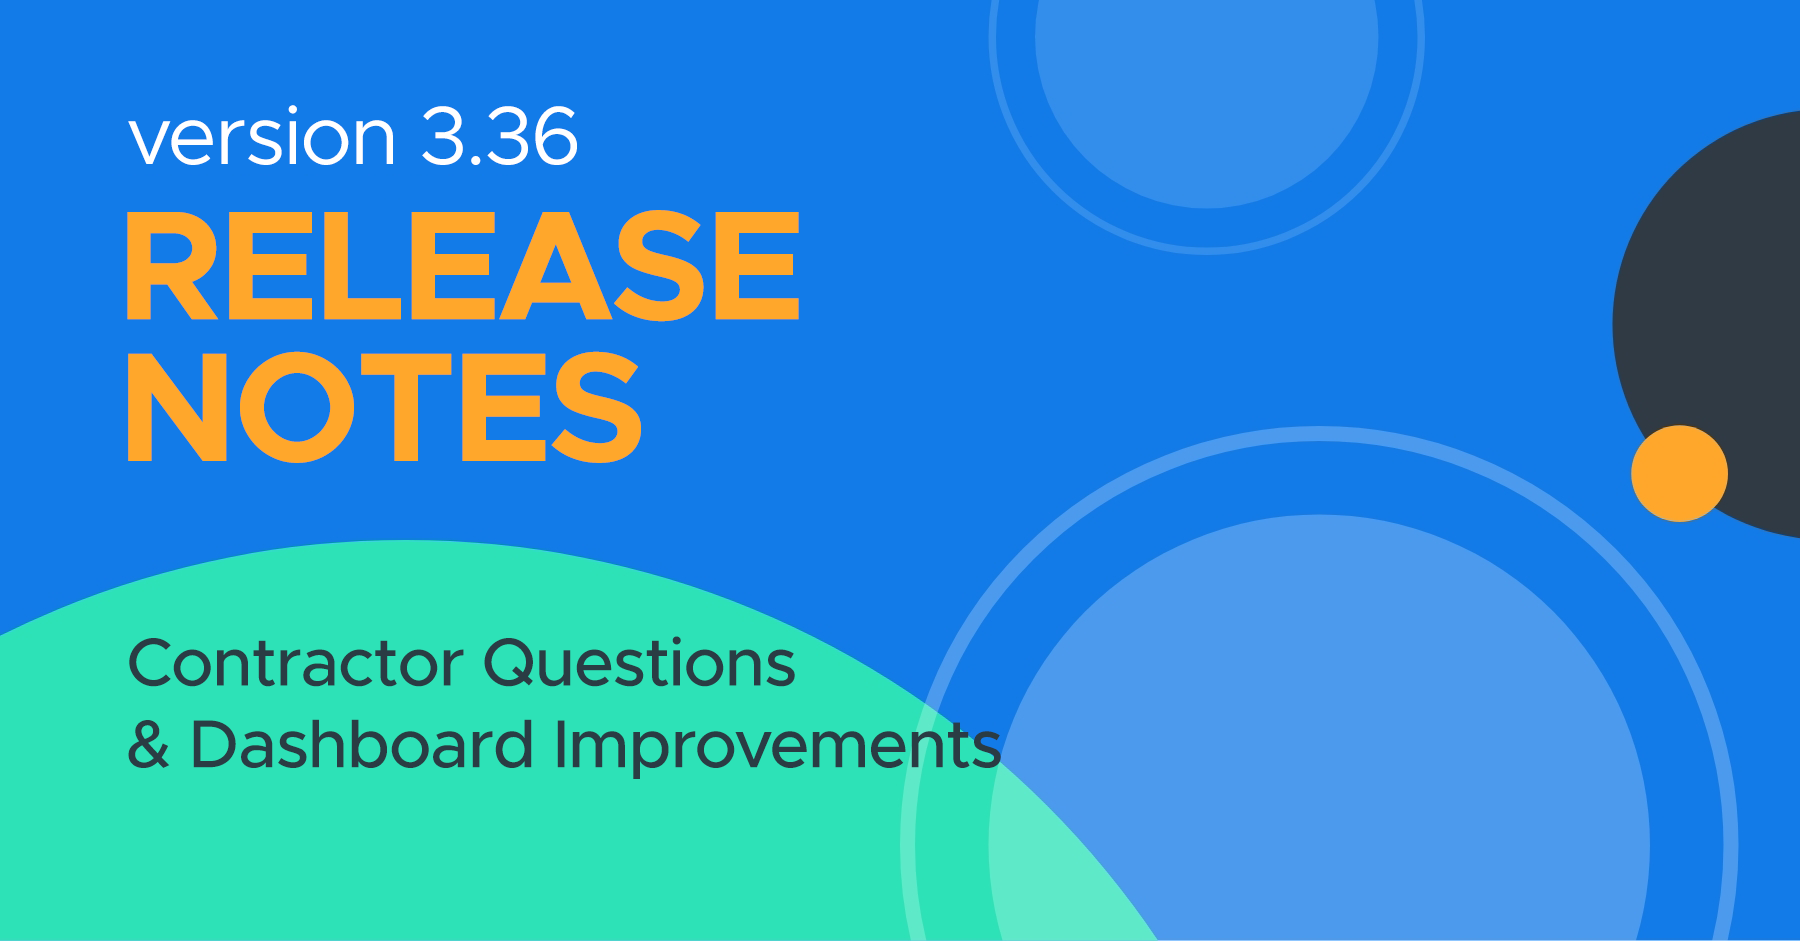 What's new? Version 3.36 release highlights